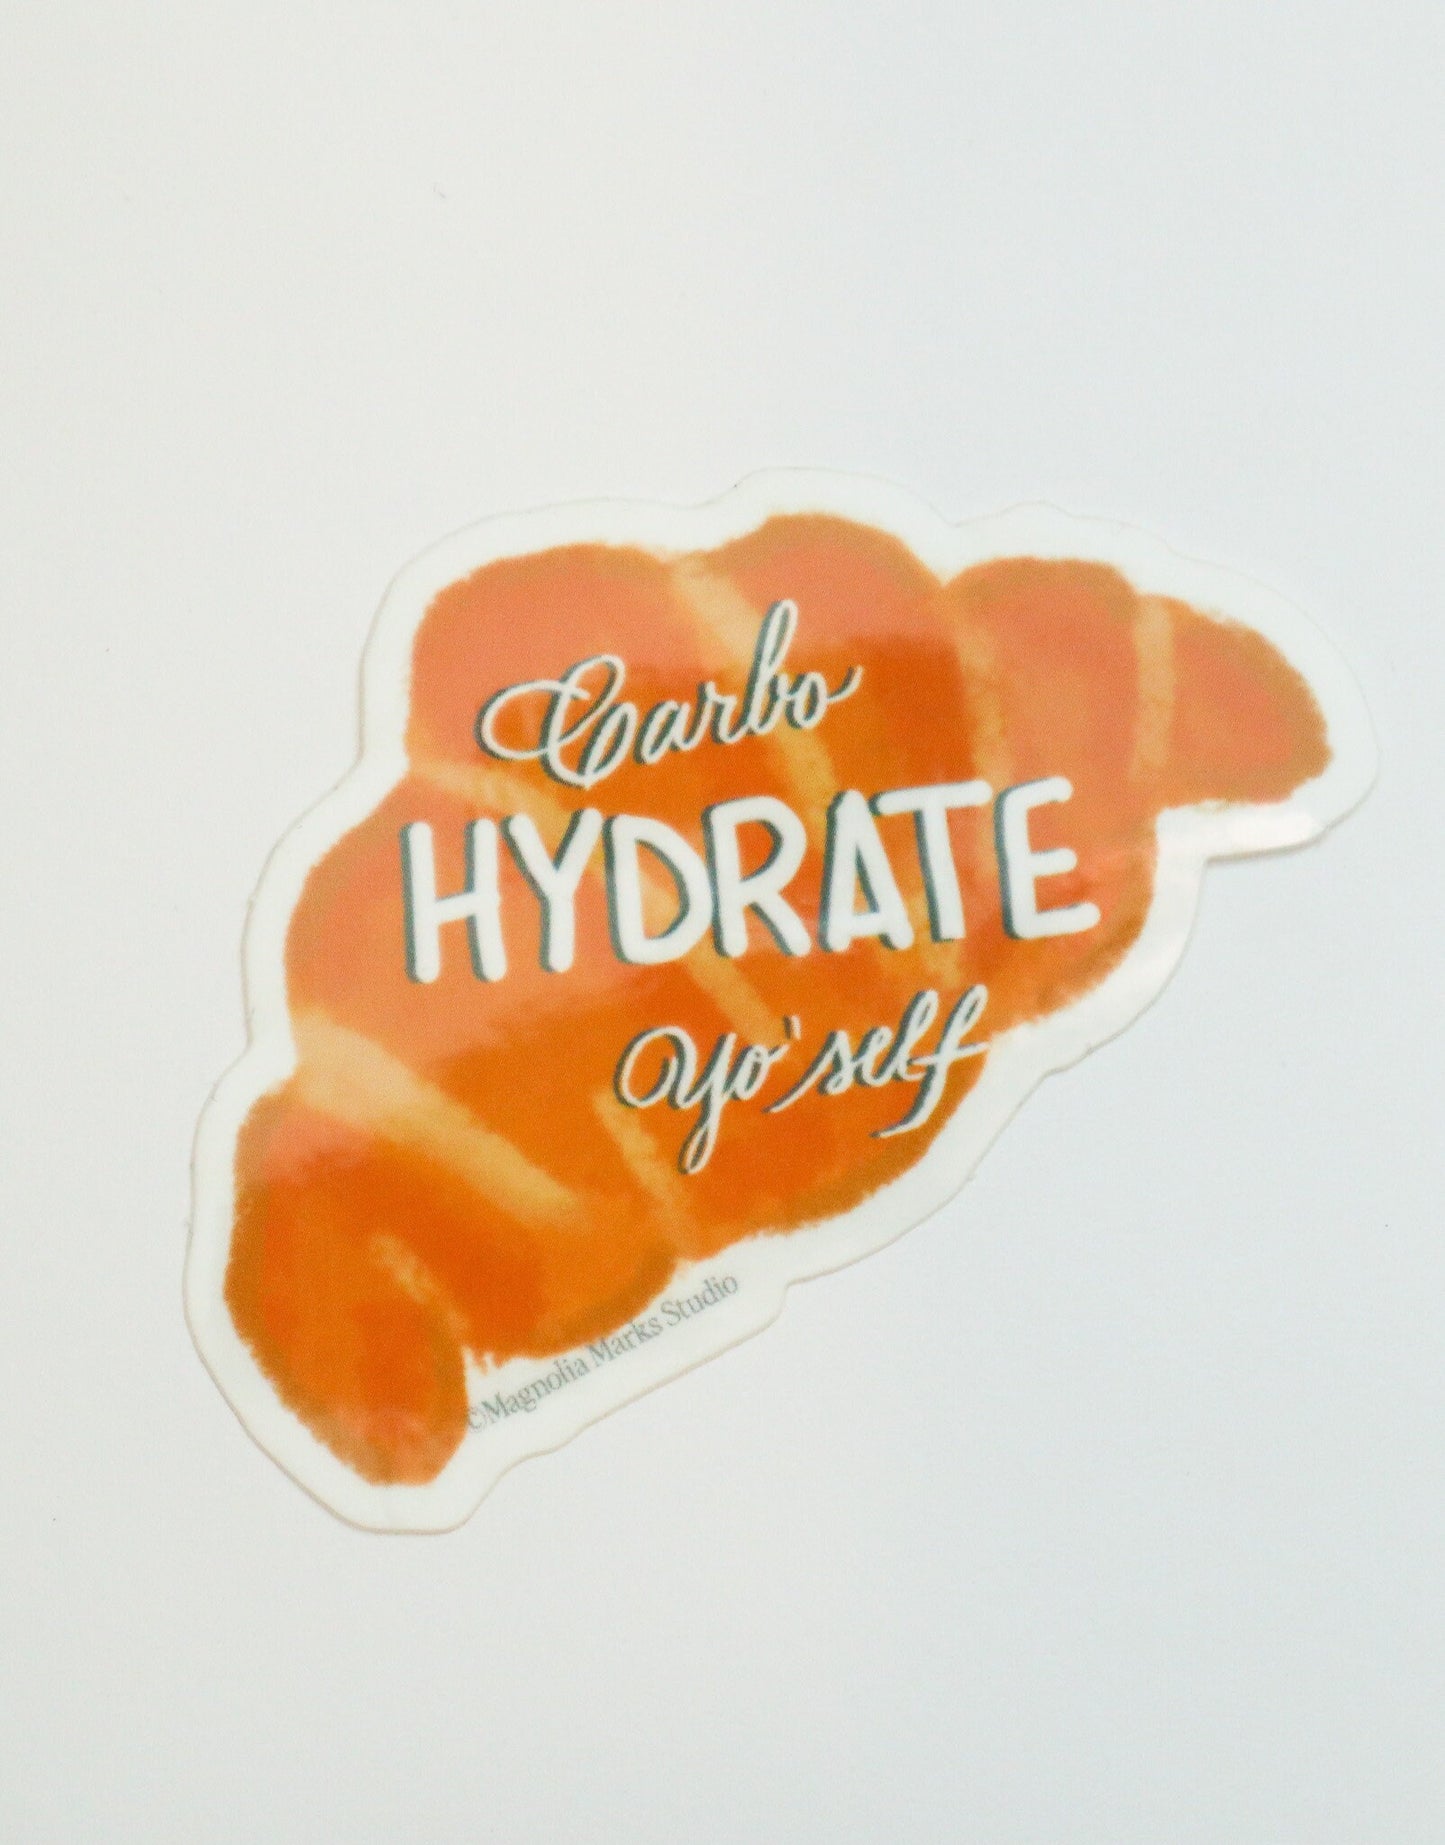 Funny carbo-HYDRATE sticker